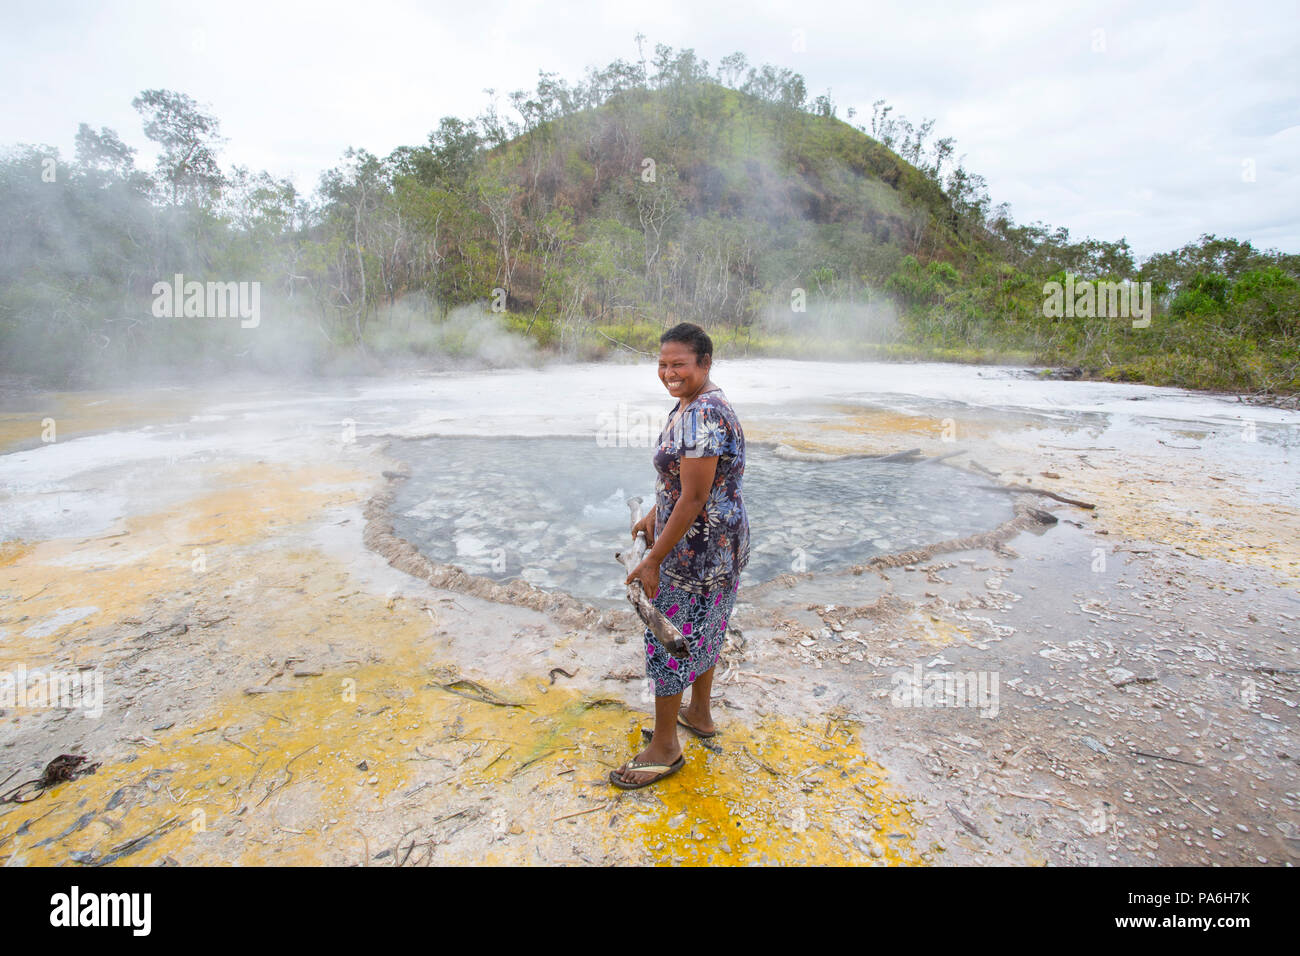 Fergusson Island locals cooking food on natural Hot Springs, Papua New Guinea Stock Photo